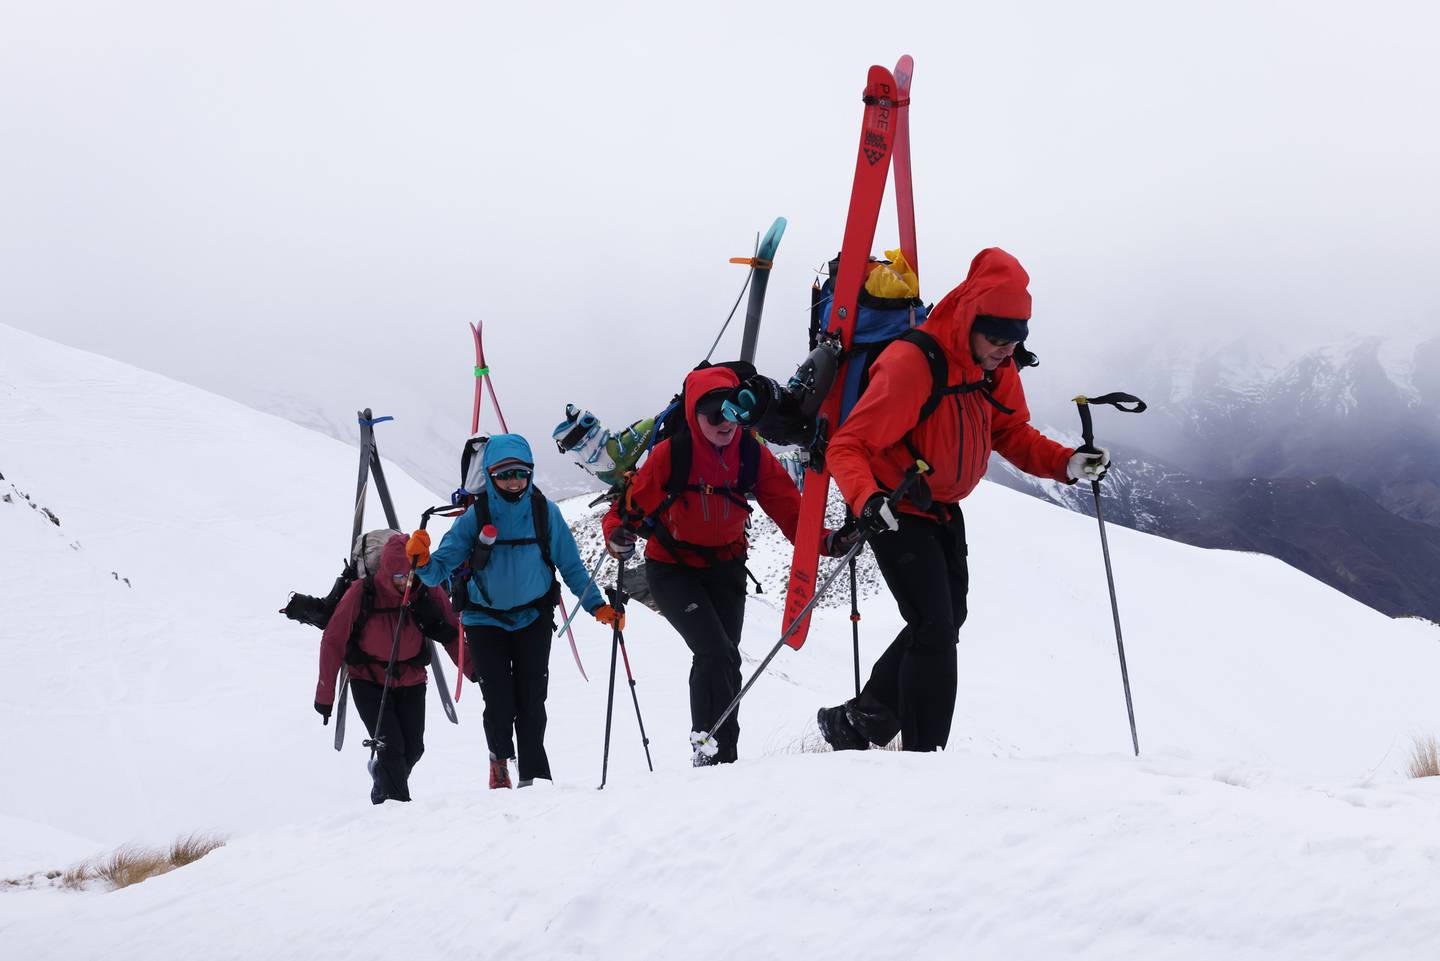 A team from the Inspiring Explorers programme were among the first to ski the Mahu Whenua route. Photo / Supplied